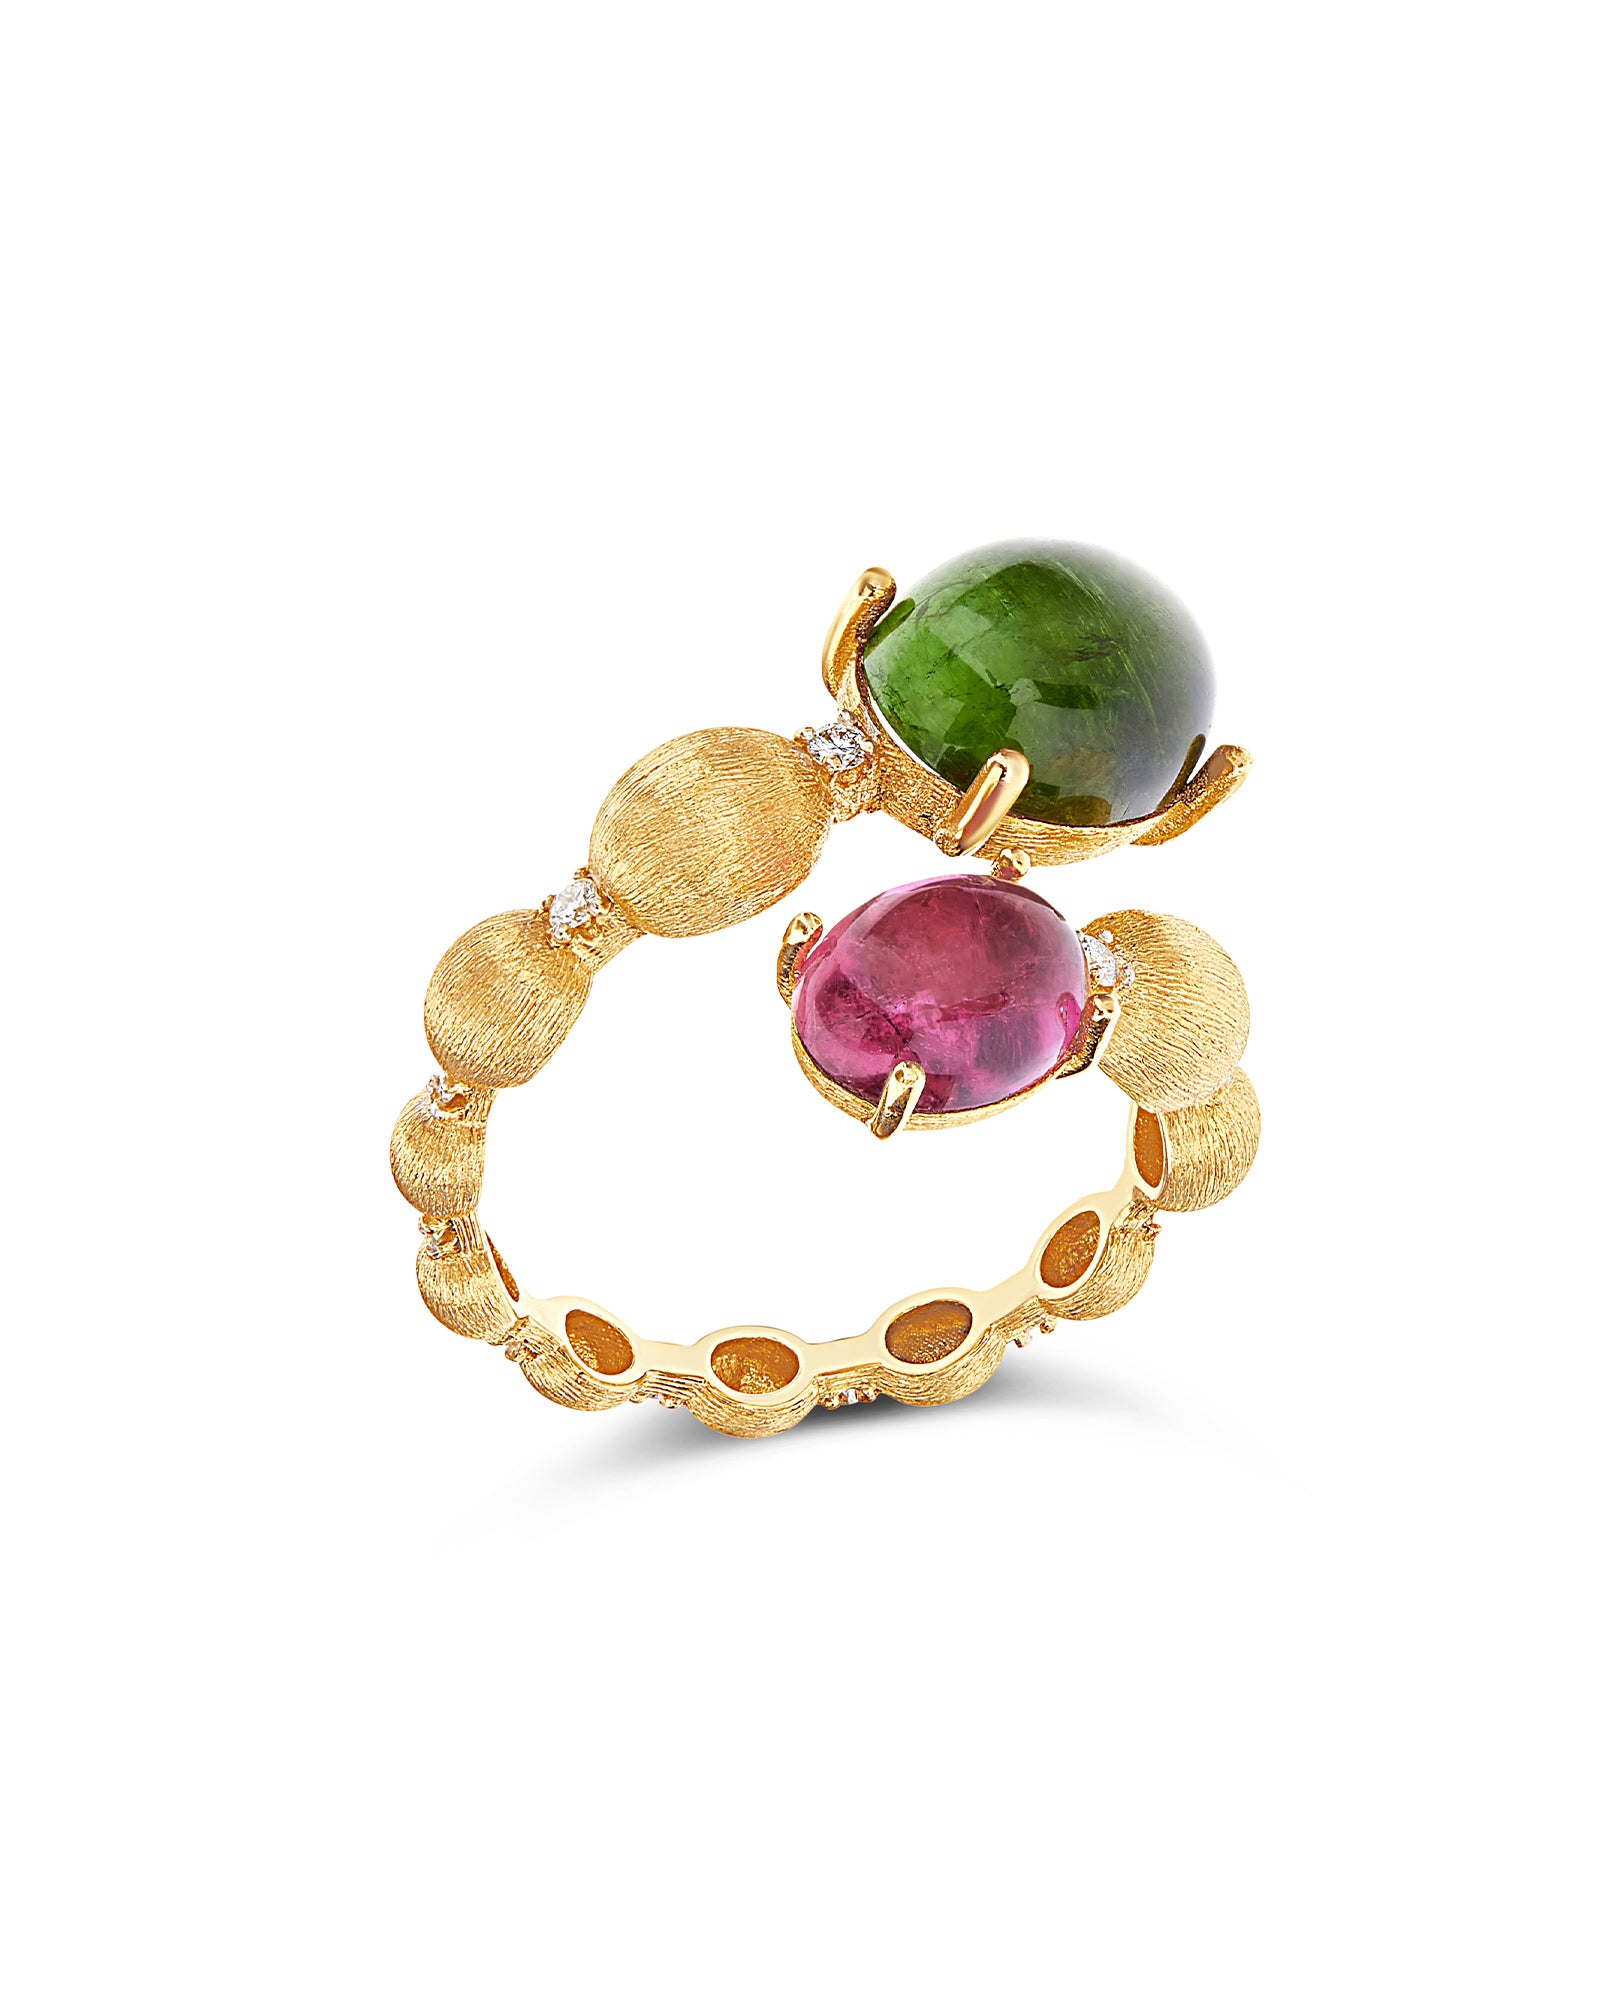 "Tourmalines" Gold and diamonds, green and pink tourmalines ring (large)